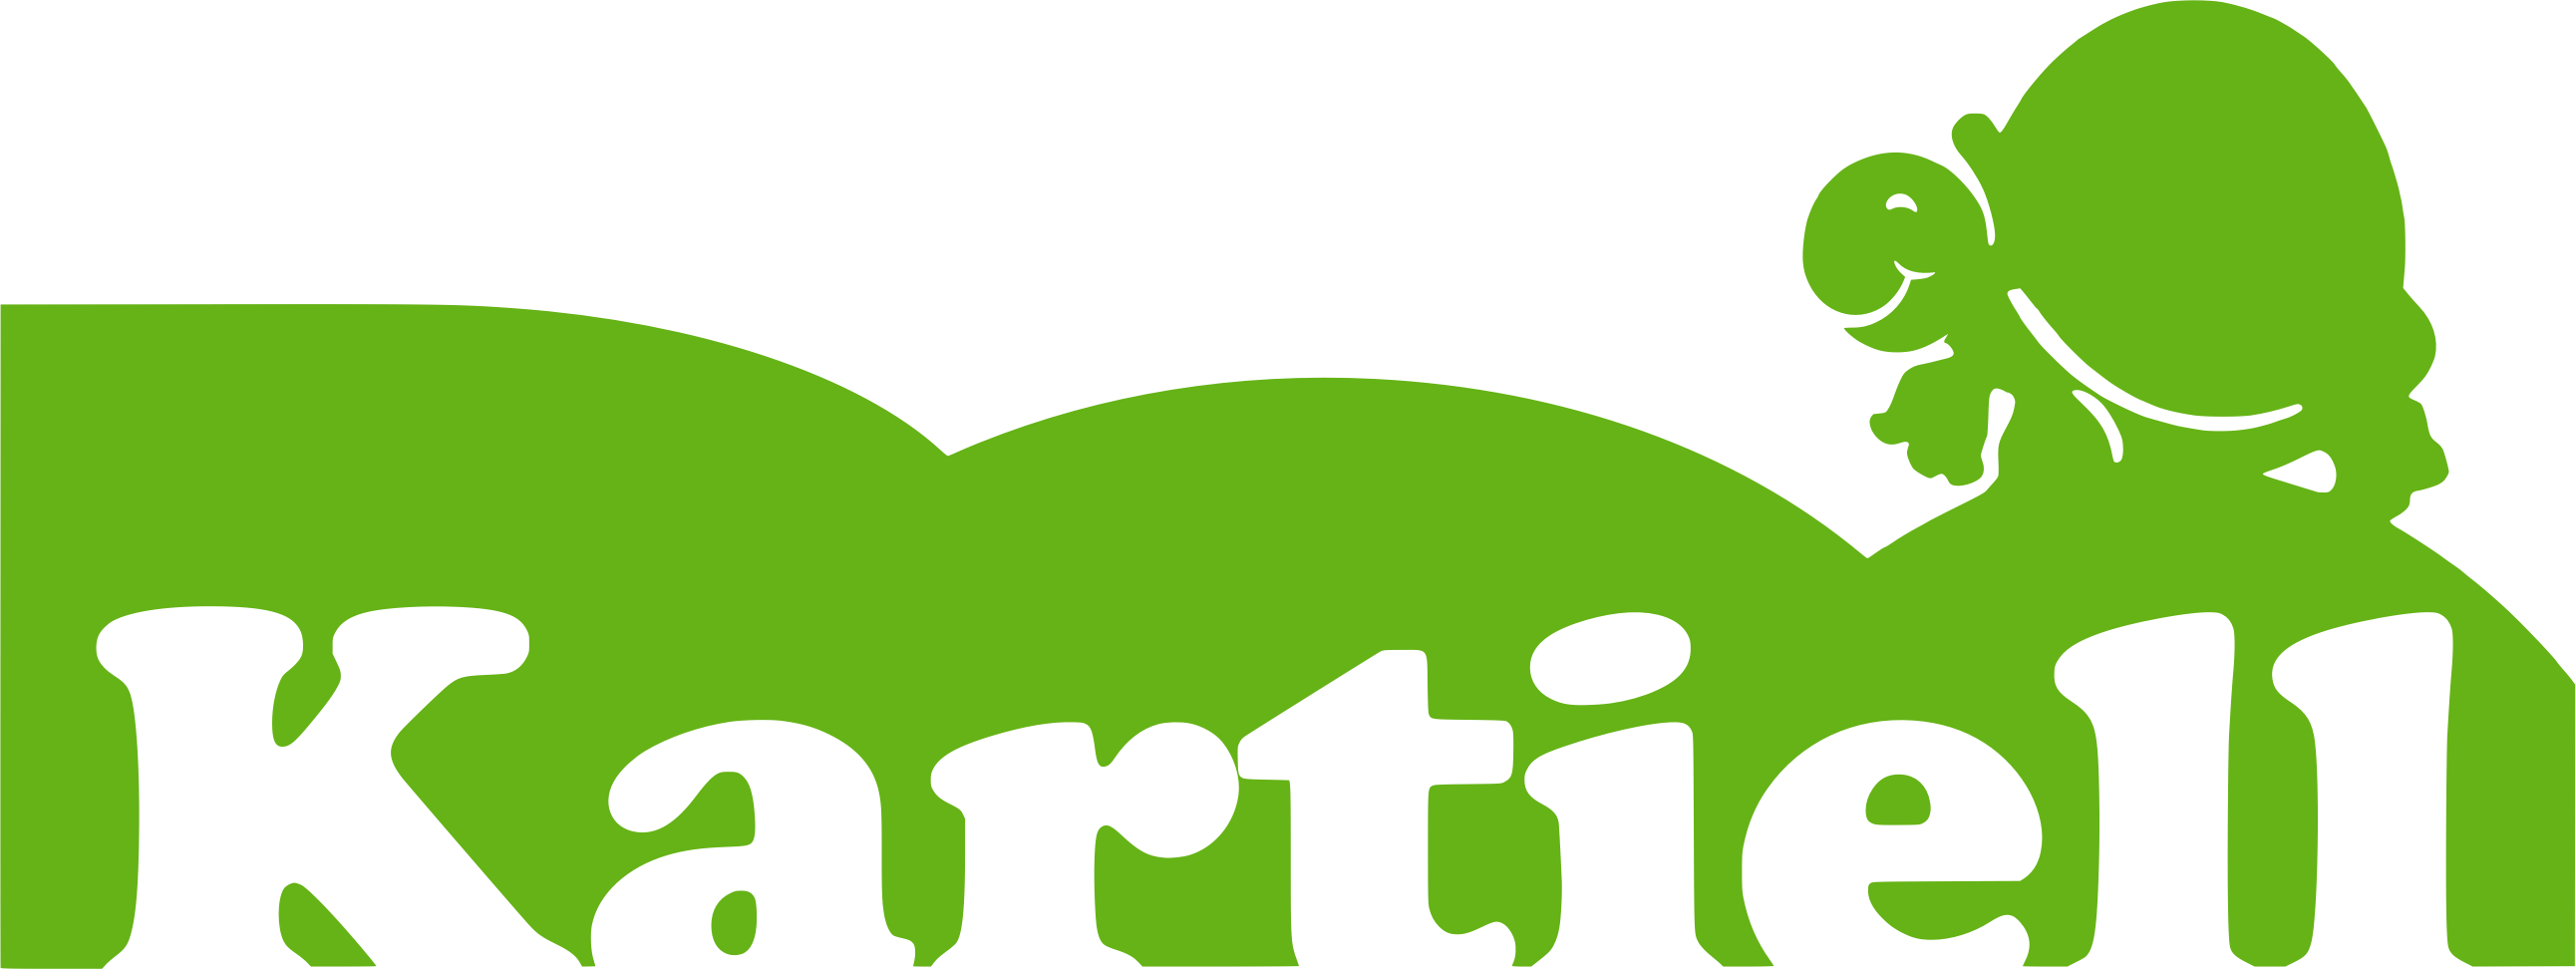 KartoClick Extended